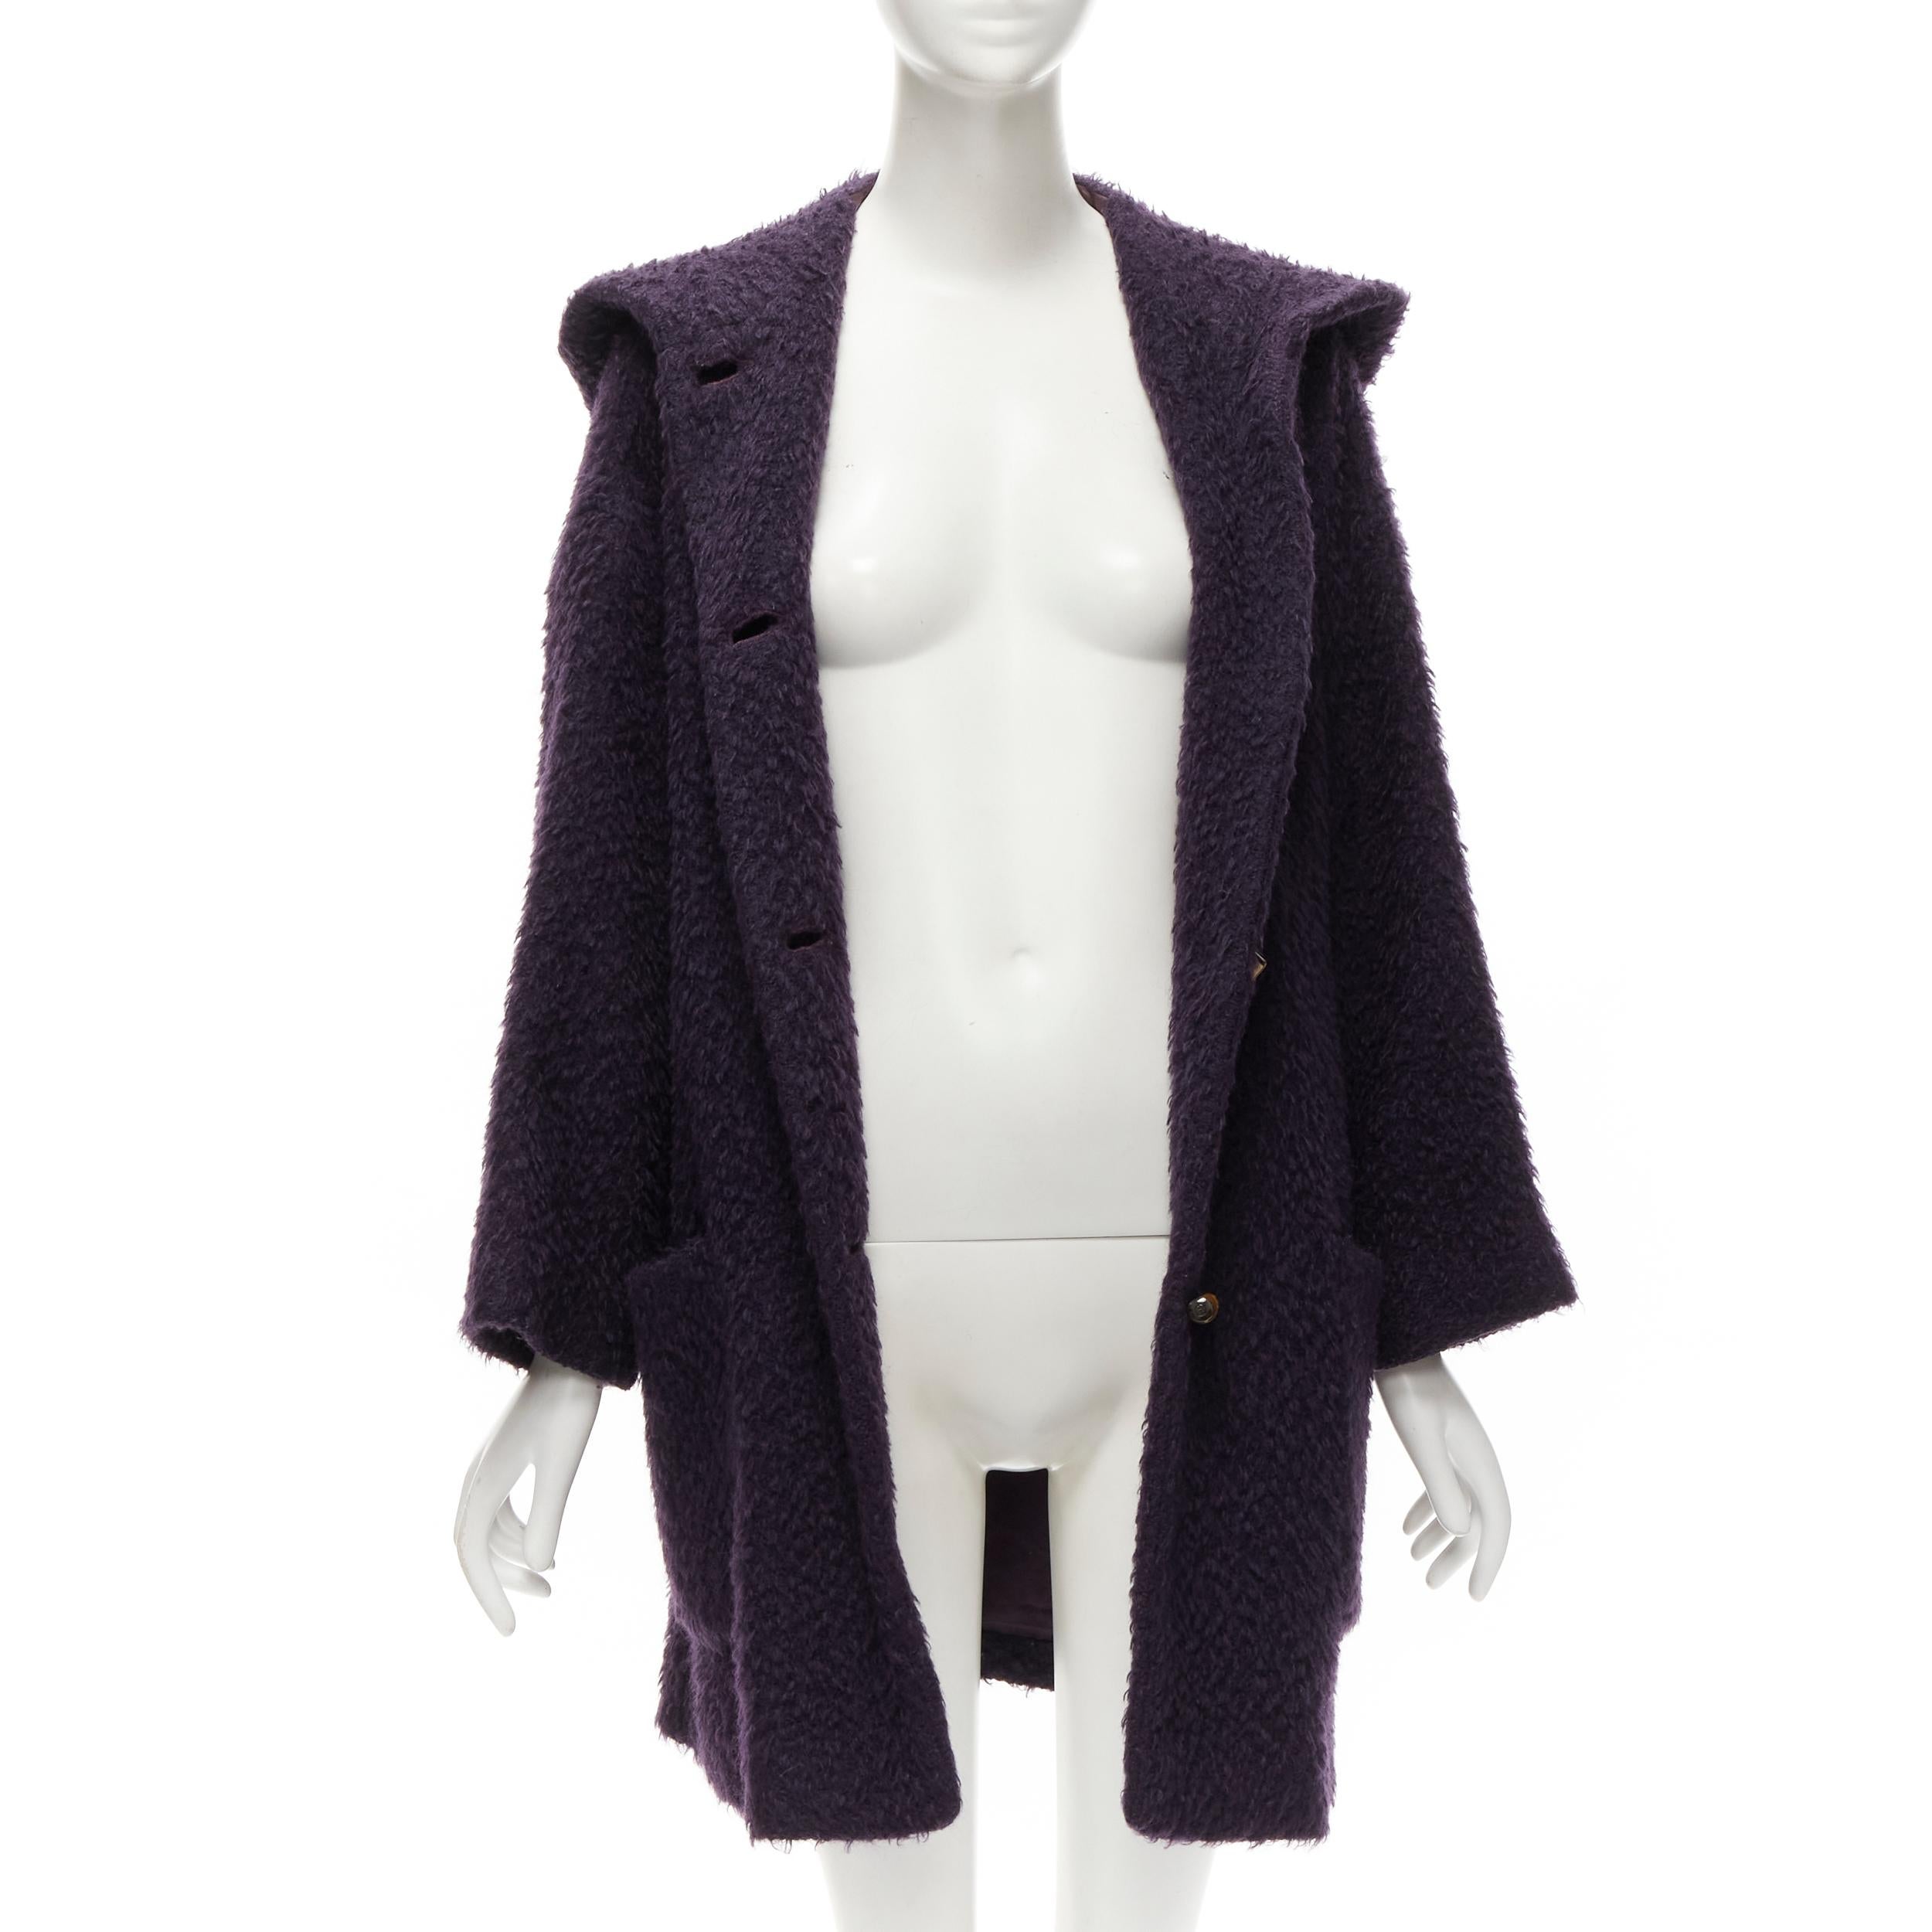 Black GUCCI Tom Ford 1996 Vintage purple mohair wool GG bamboo button coat IT42 M